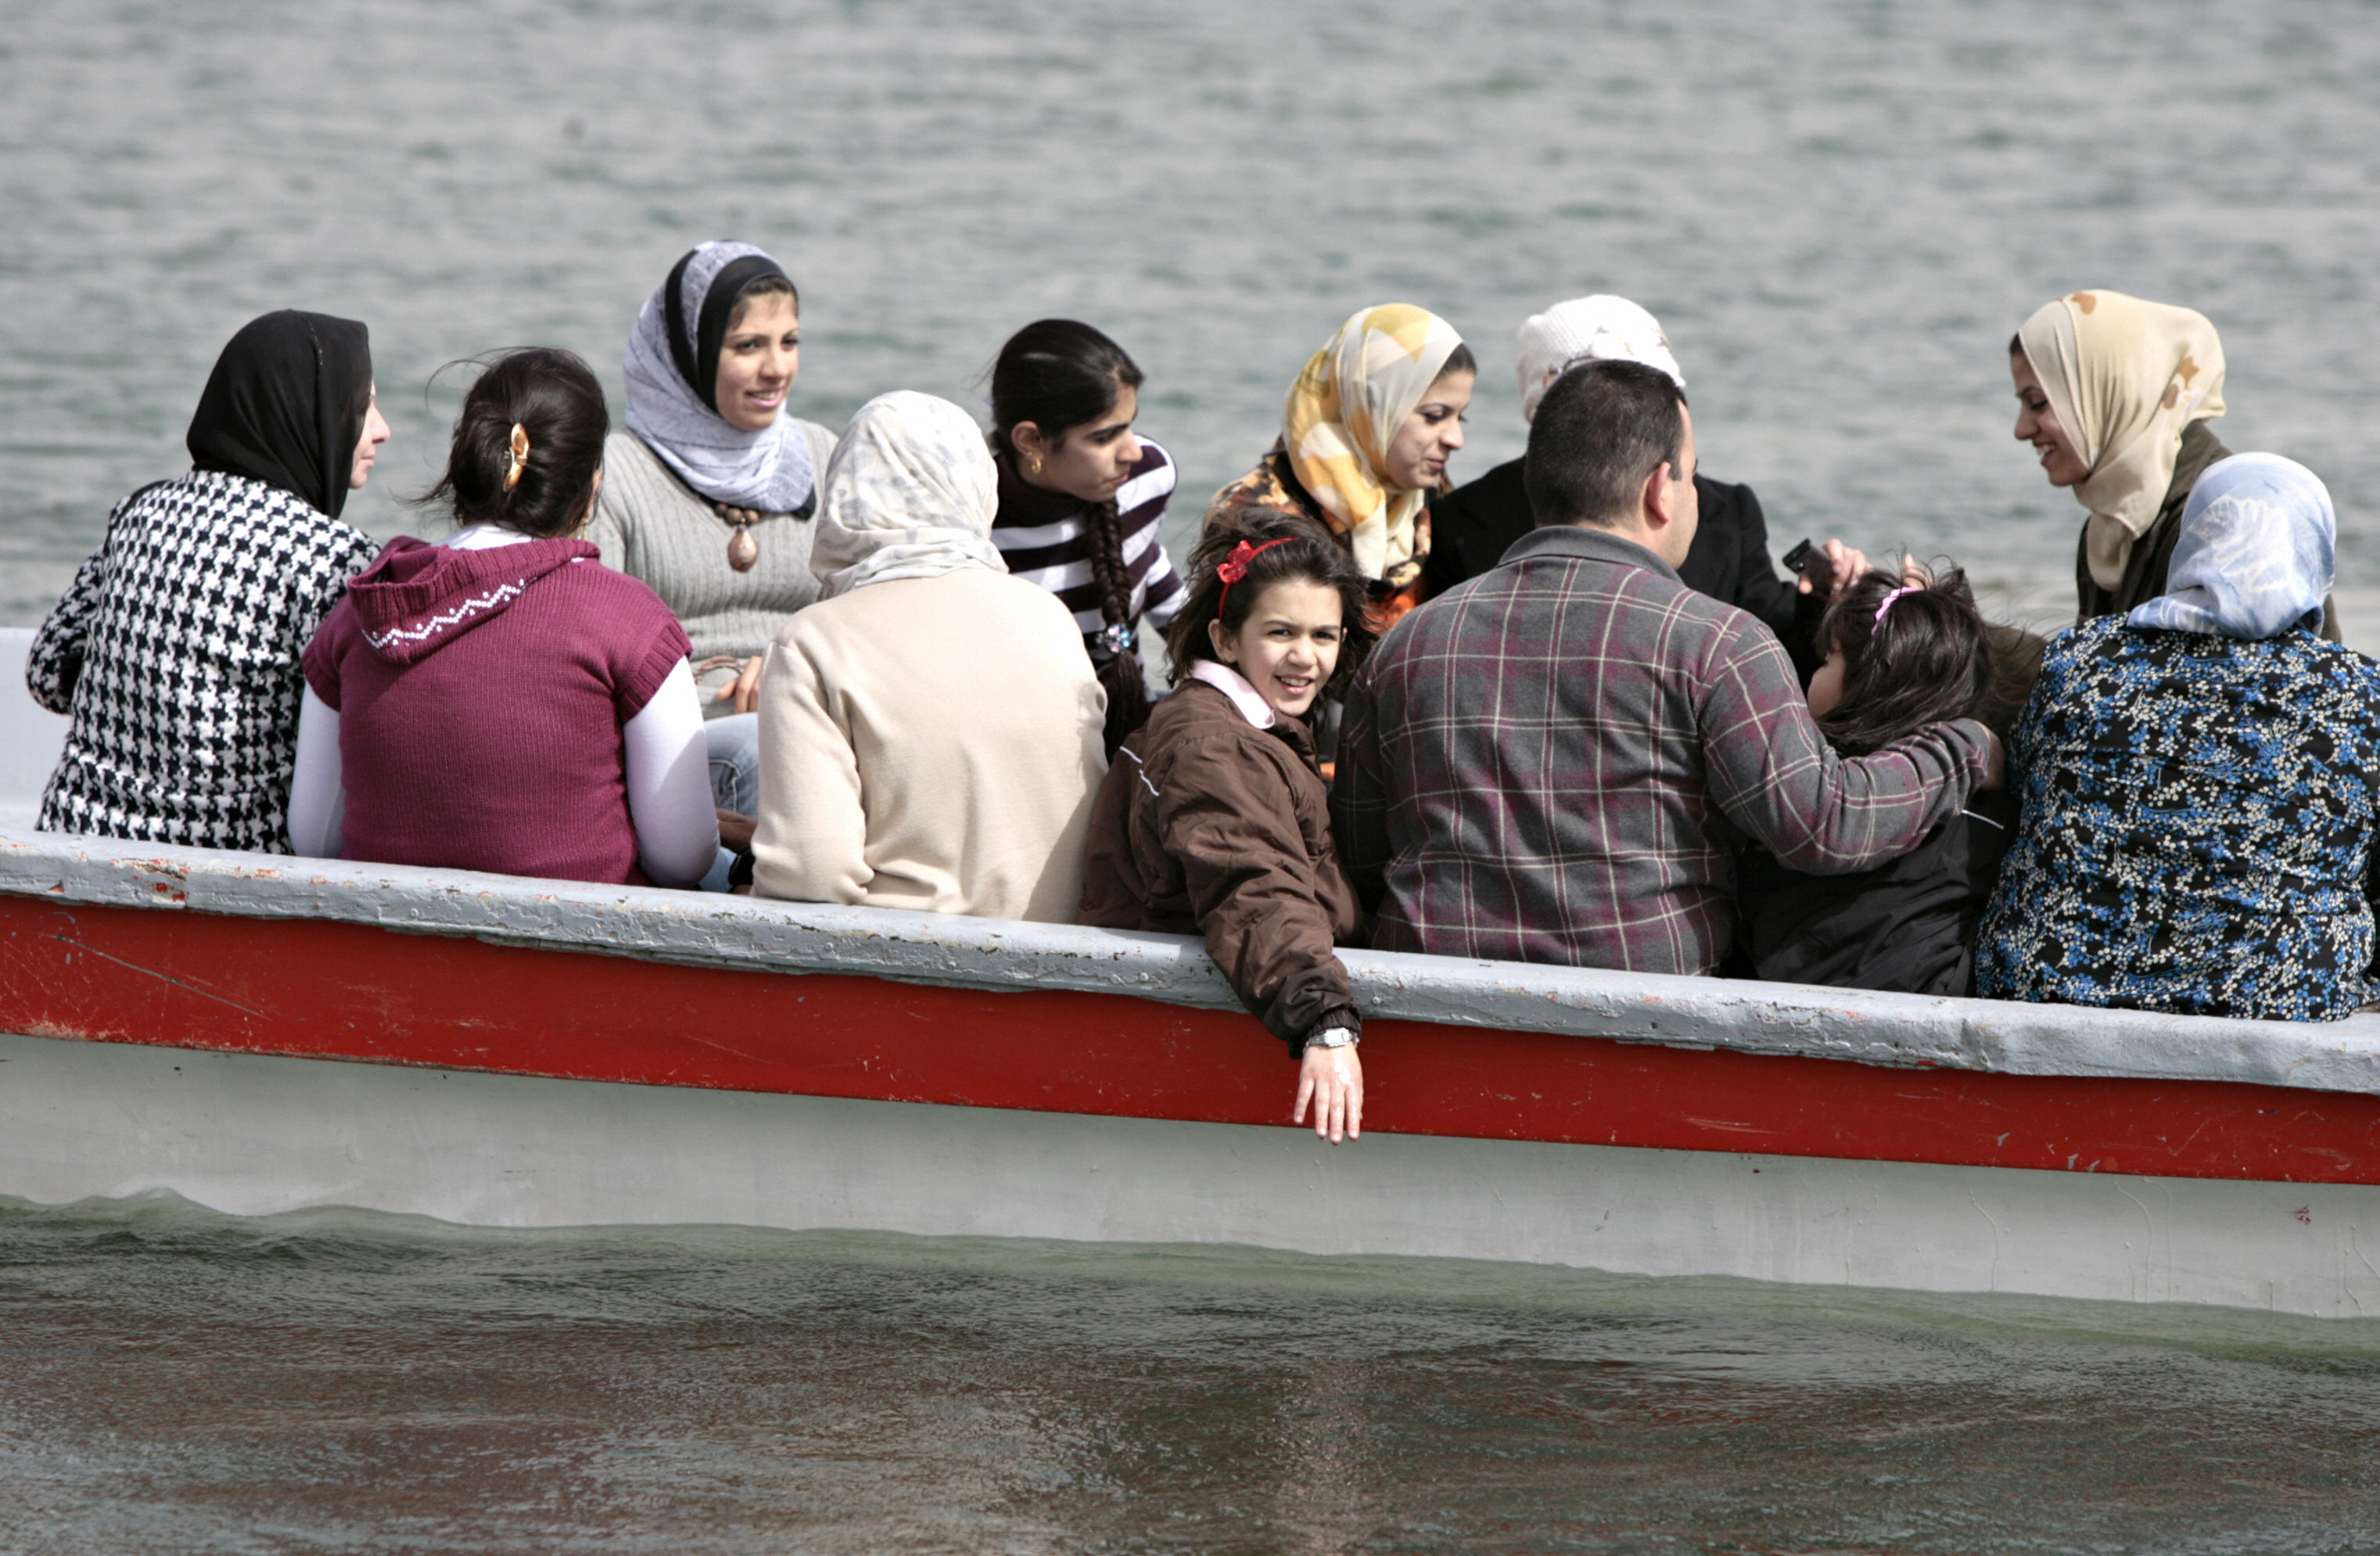 AHMAD AL-RUBAYE/AFP/Getty Images. While the weather is relatively cool at 20 degrees centigrade, hundreds of families and youth turn up every Friday to the park to enjoy tours on boats in the large pond.